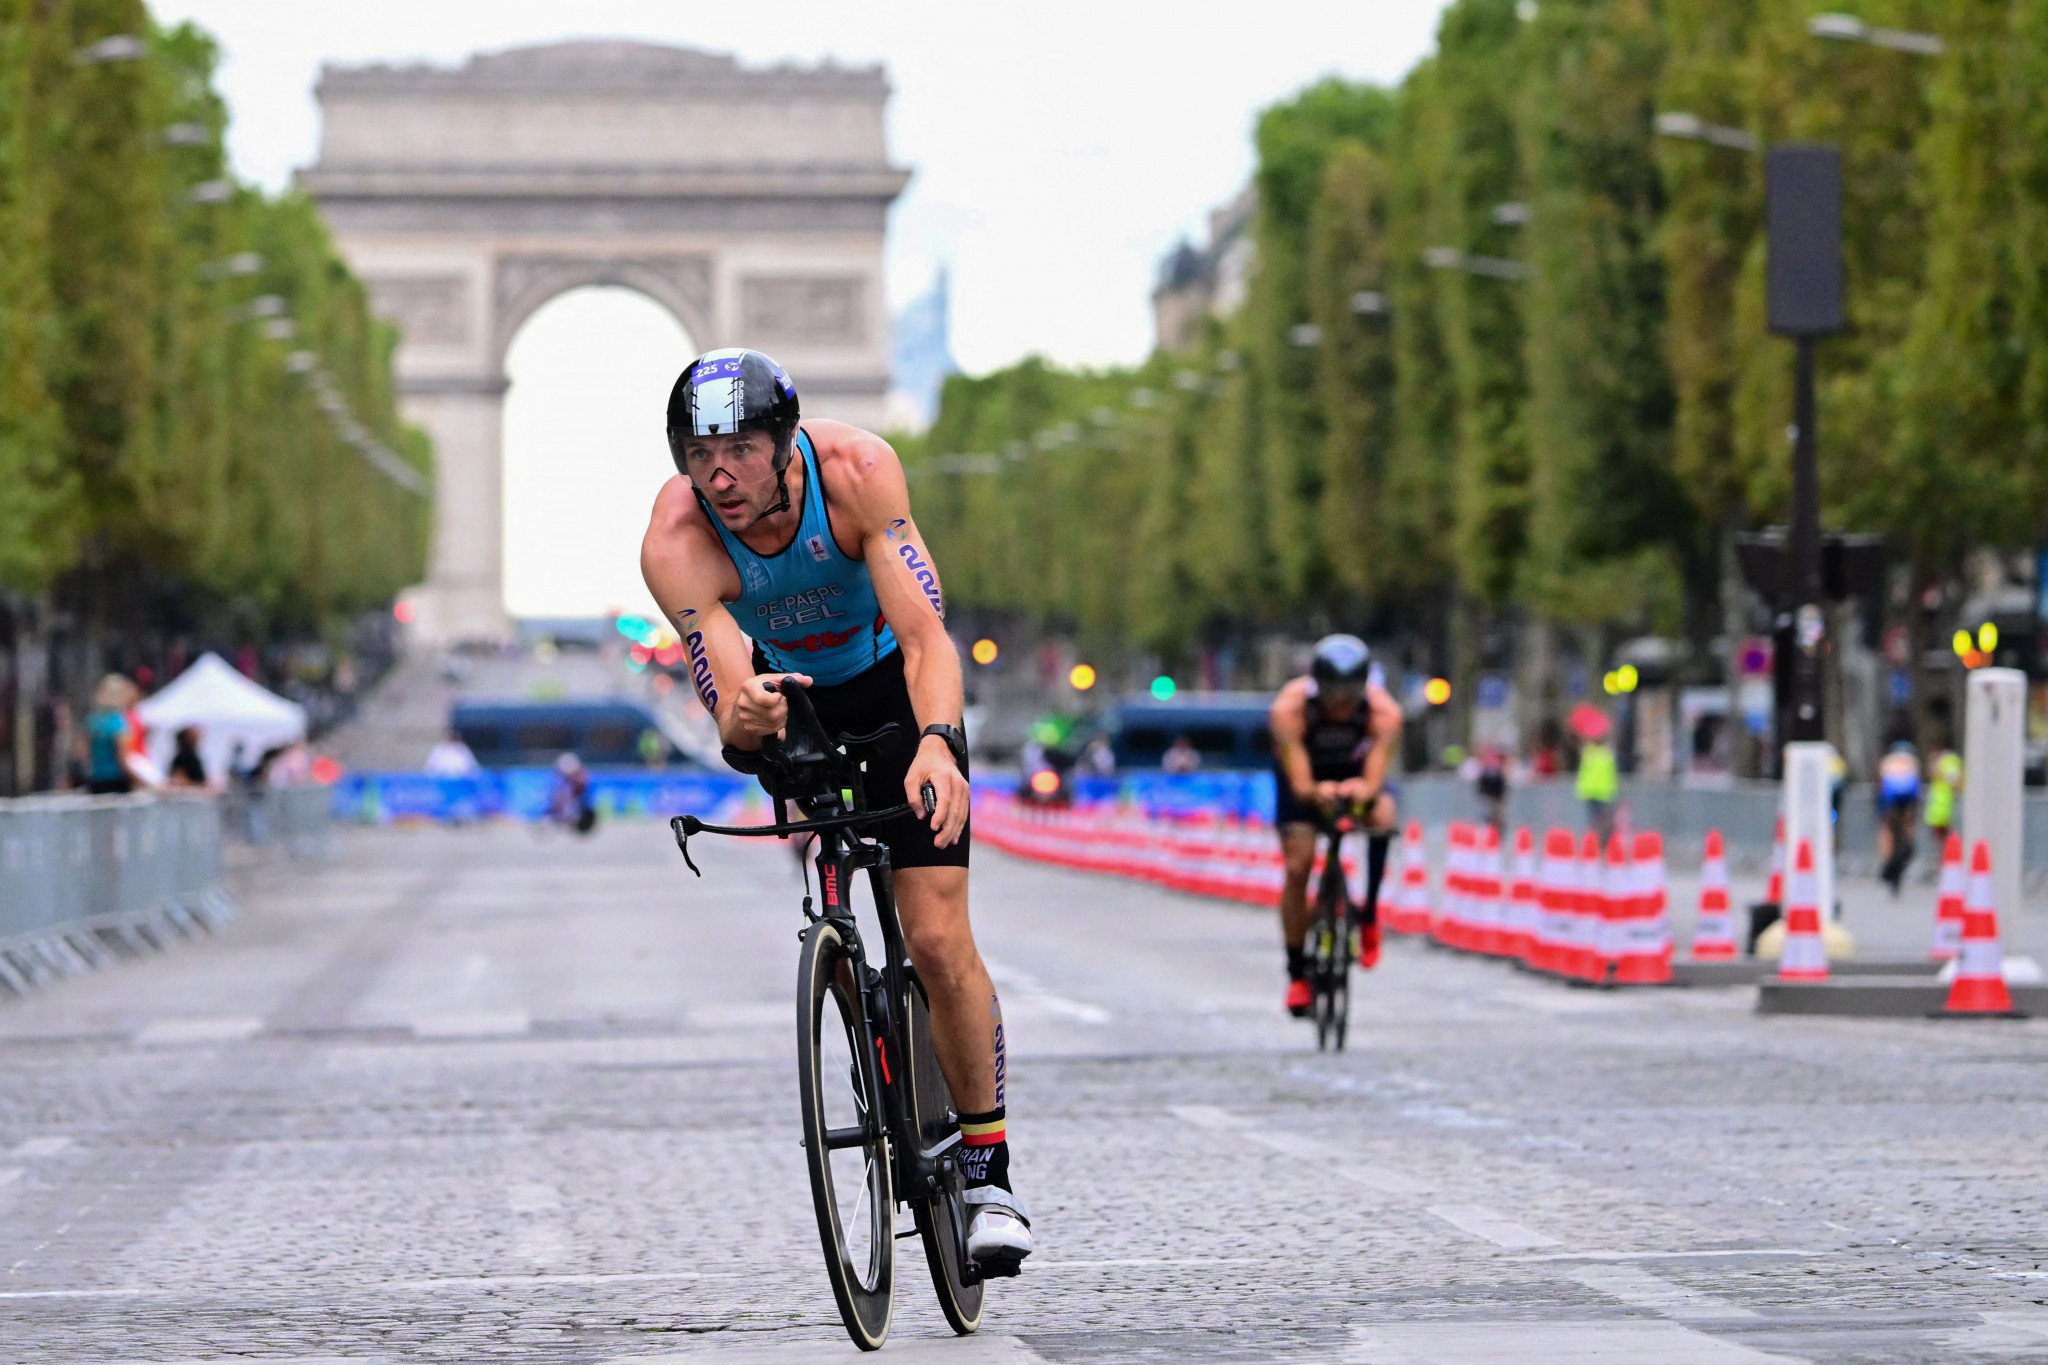 The Para triathlon test event adopted a duathlon format while an investigation was conducted into data discrepancies in the quality of the water in the Seine ©Getty Images